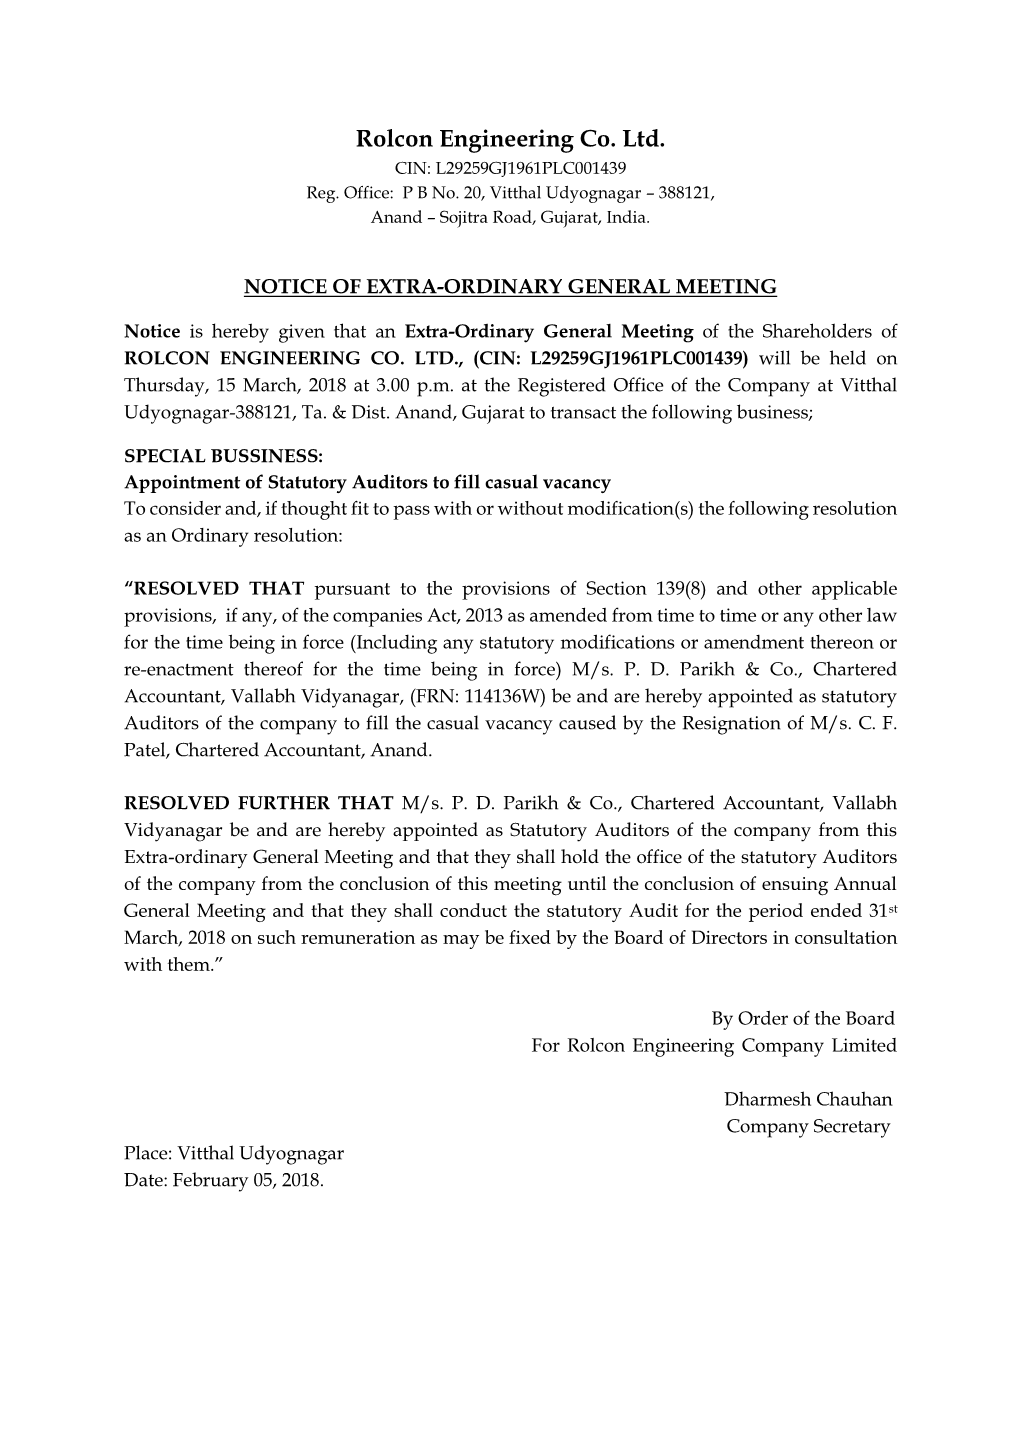 Notice of Extra-Ordinary General Meeting